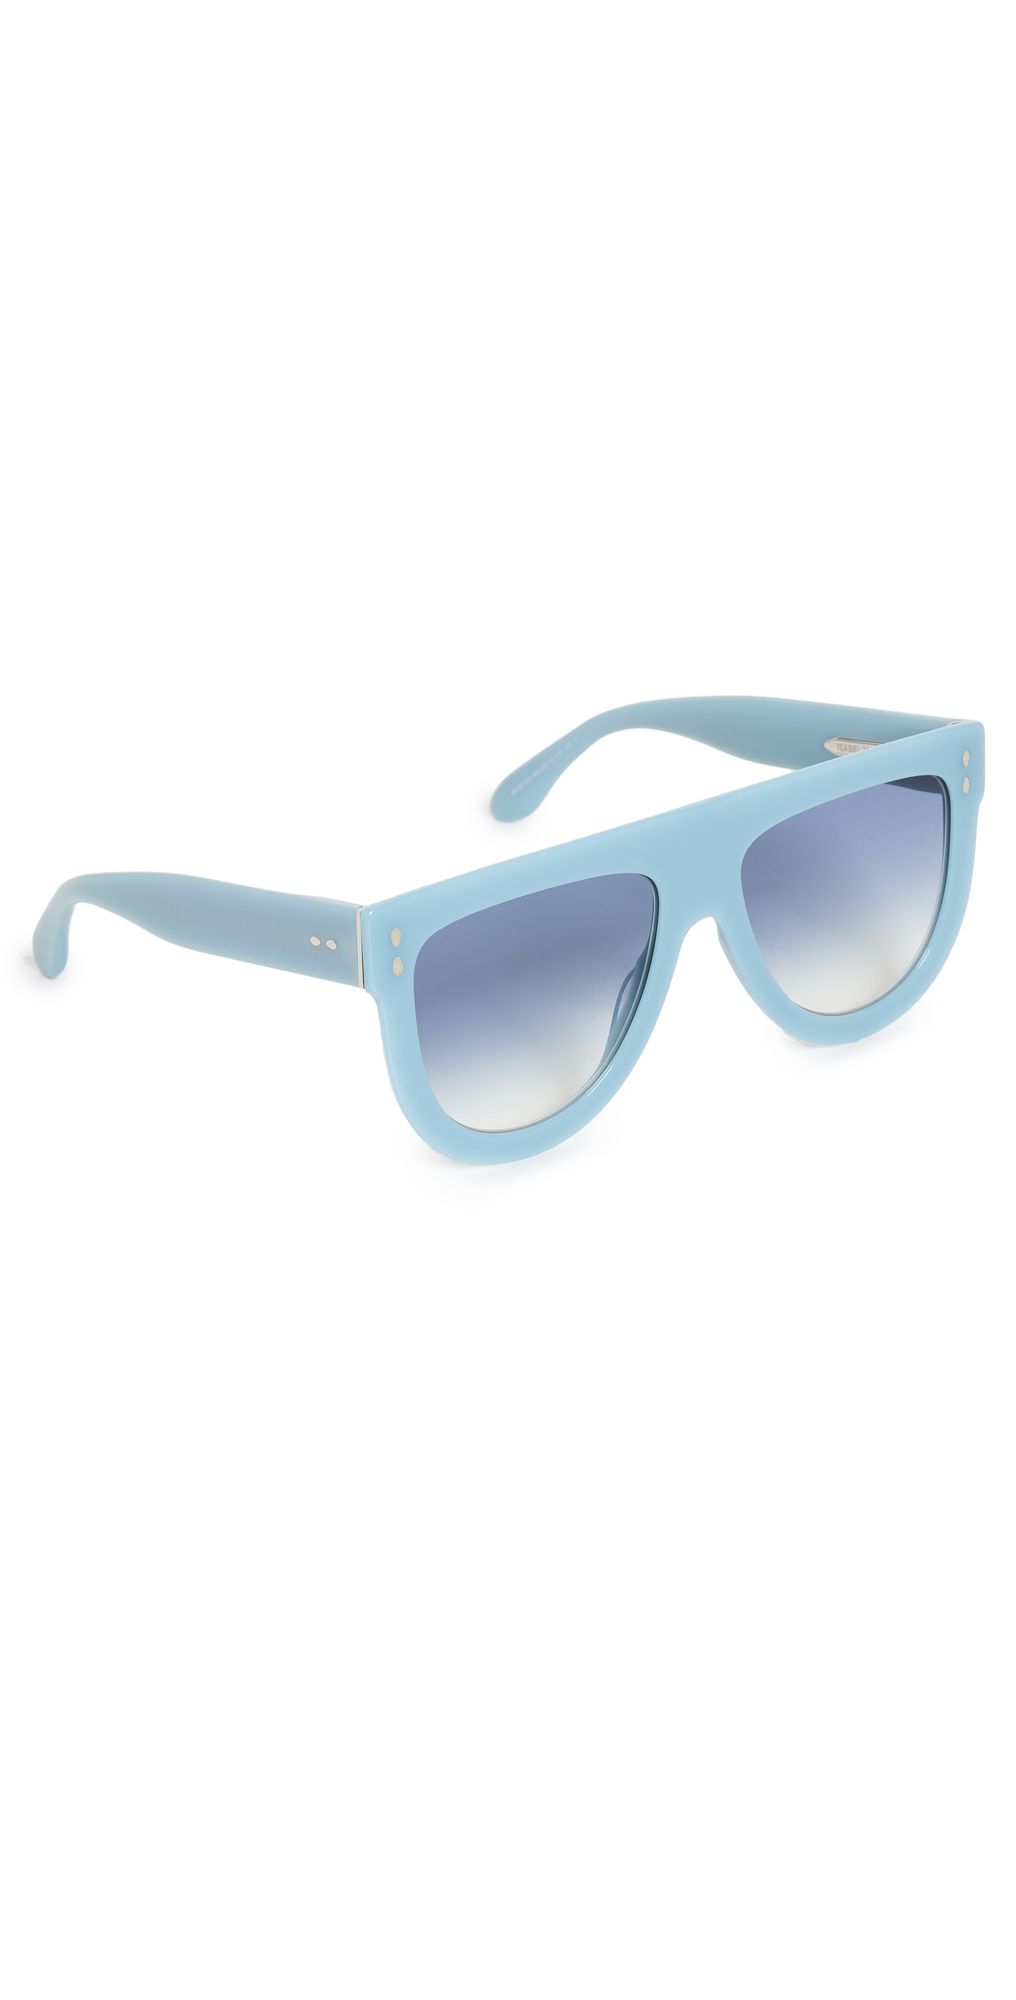 Rounded Flat Top Sunglasses | Shopbop